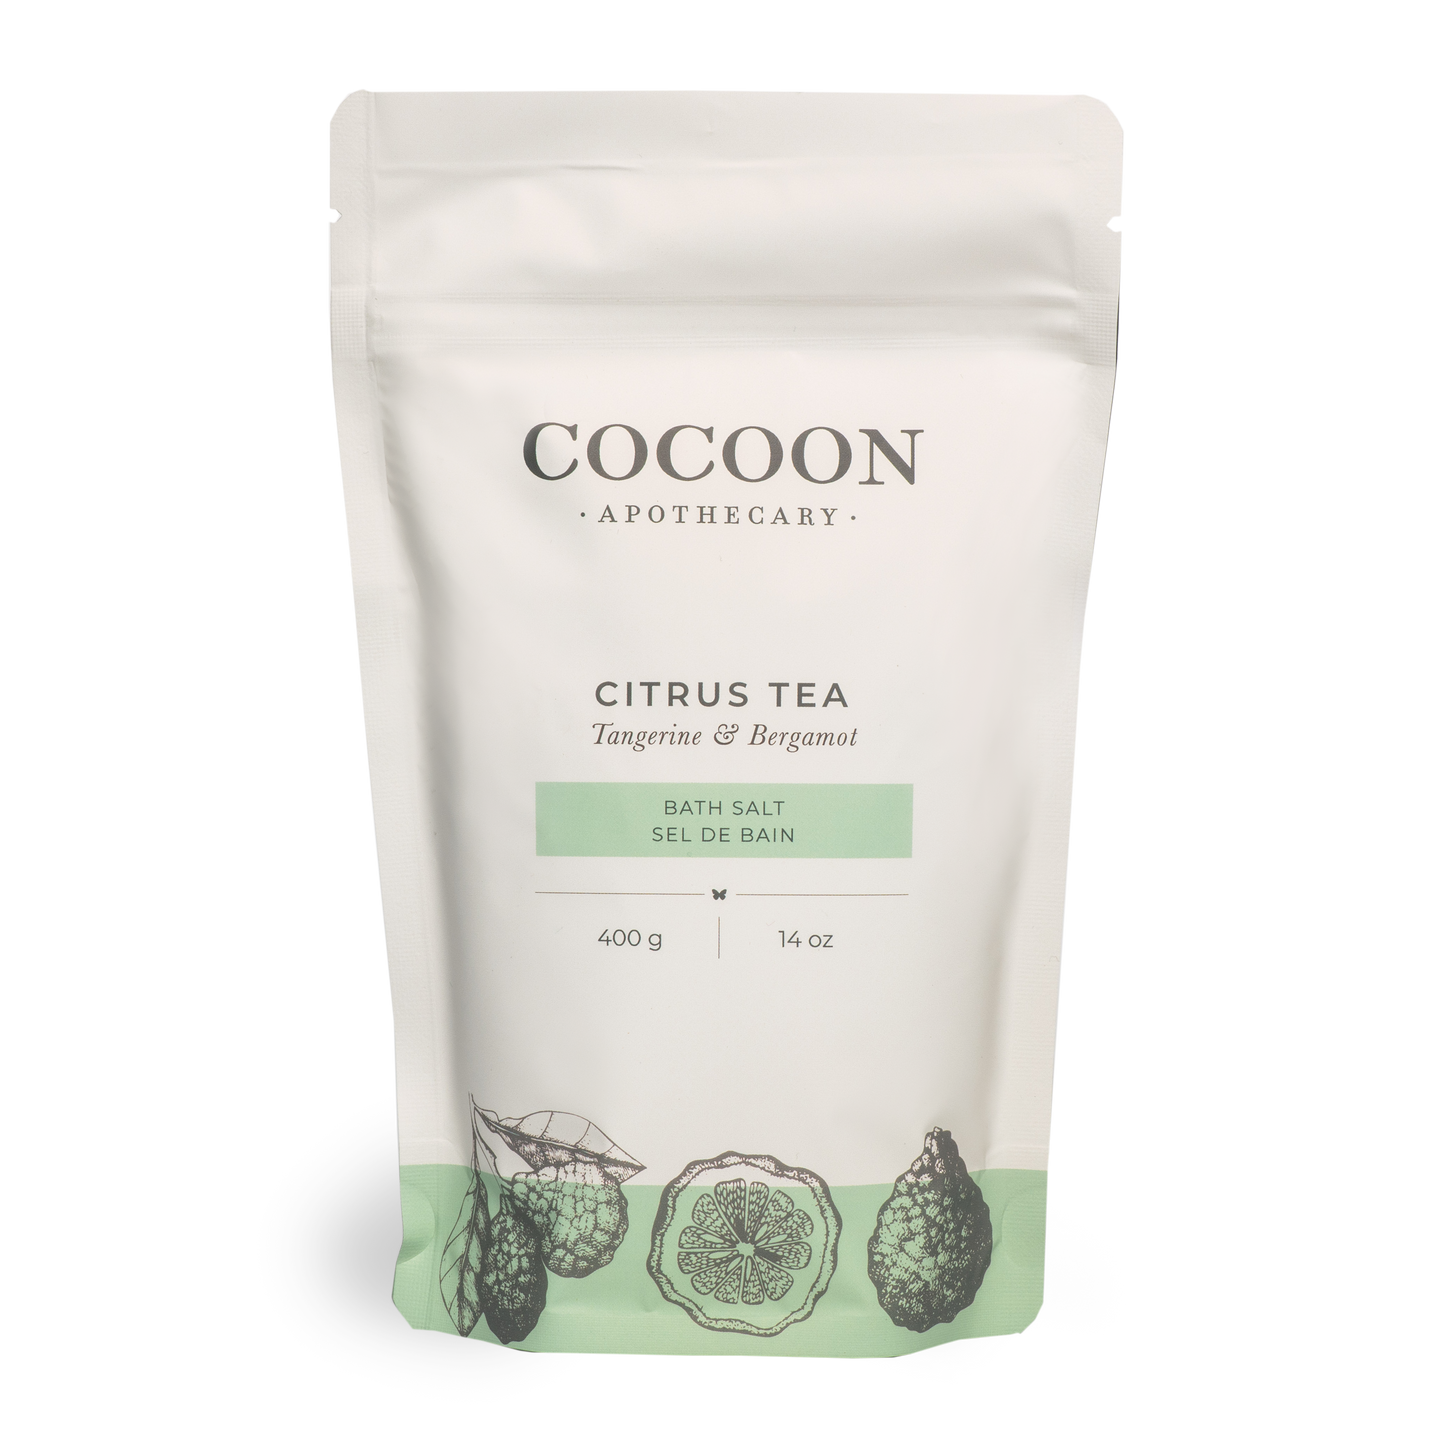 Mineral rich Dead Sea salts, Epsom salts and pure essential oils creates a spa-like bathing experience. Citrus Tea has a soft tea-like citrus aroma that is cheery and uplifting.